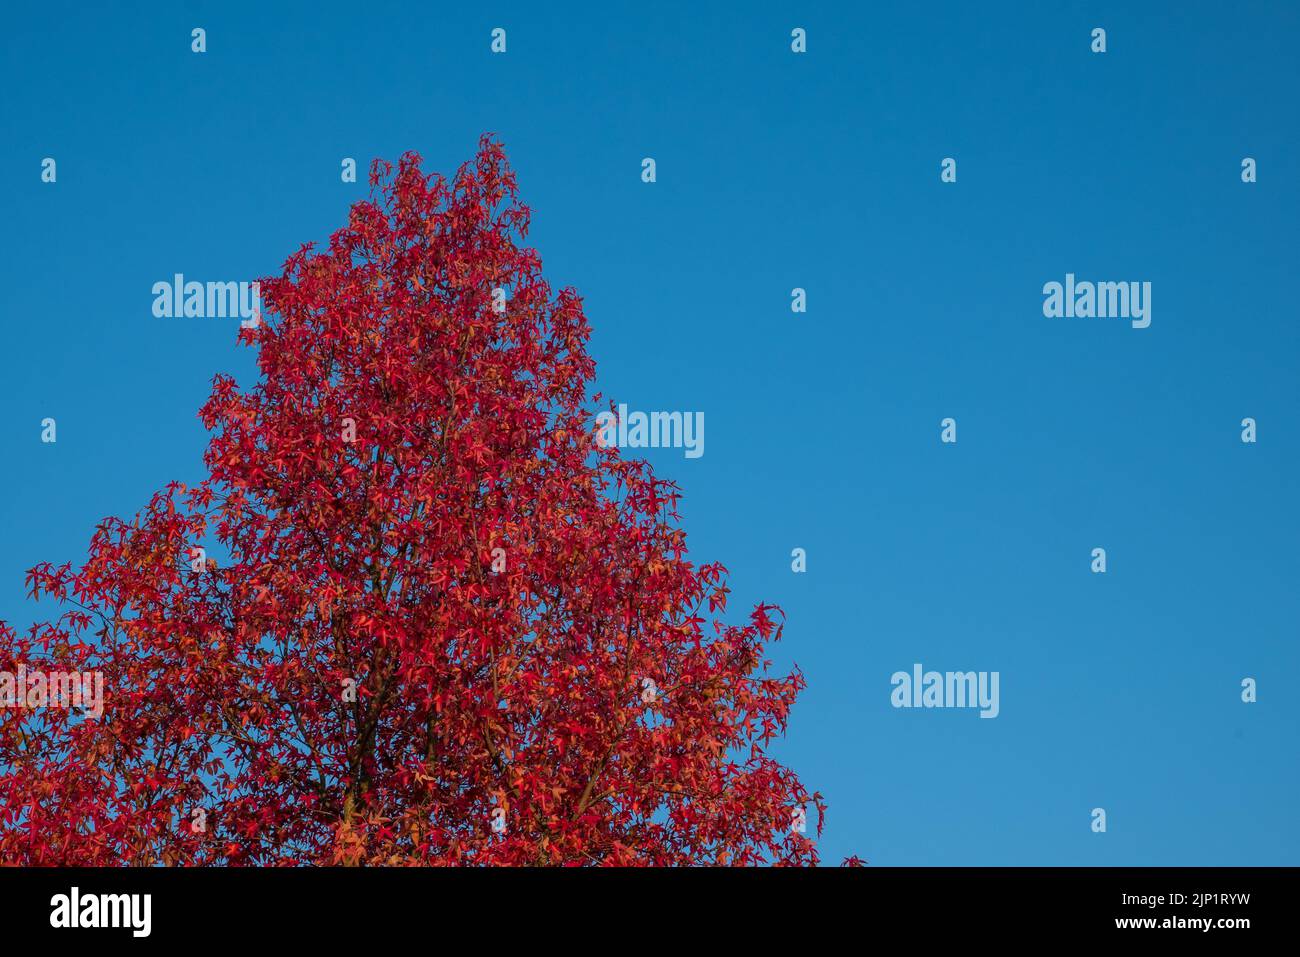 Red leaves and blue sky in autumn. Stock Photo